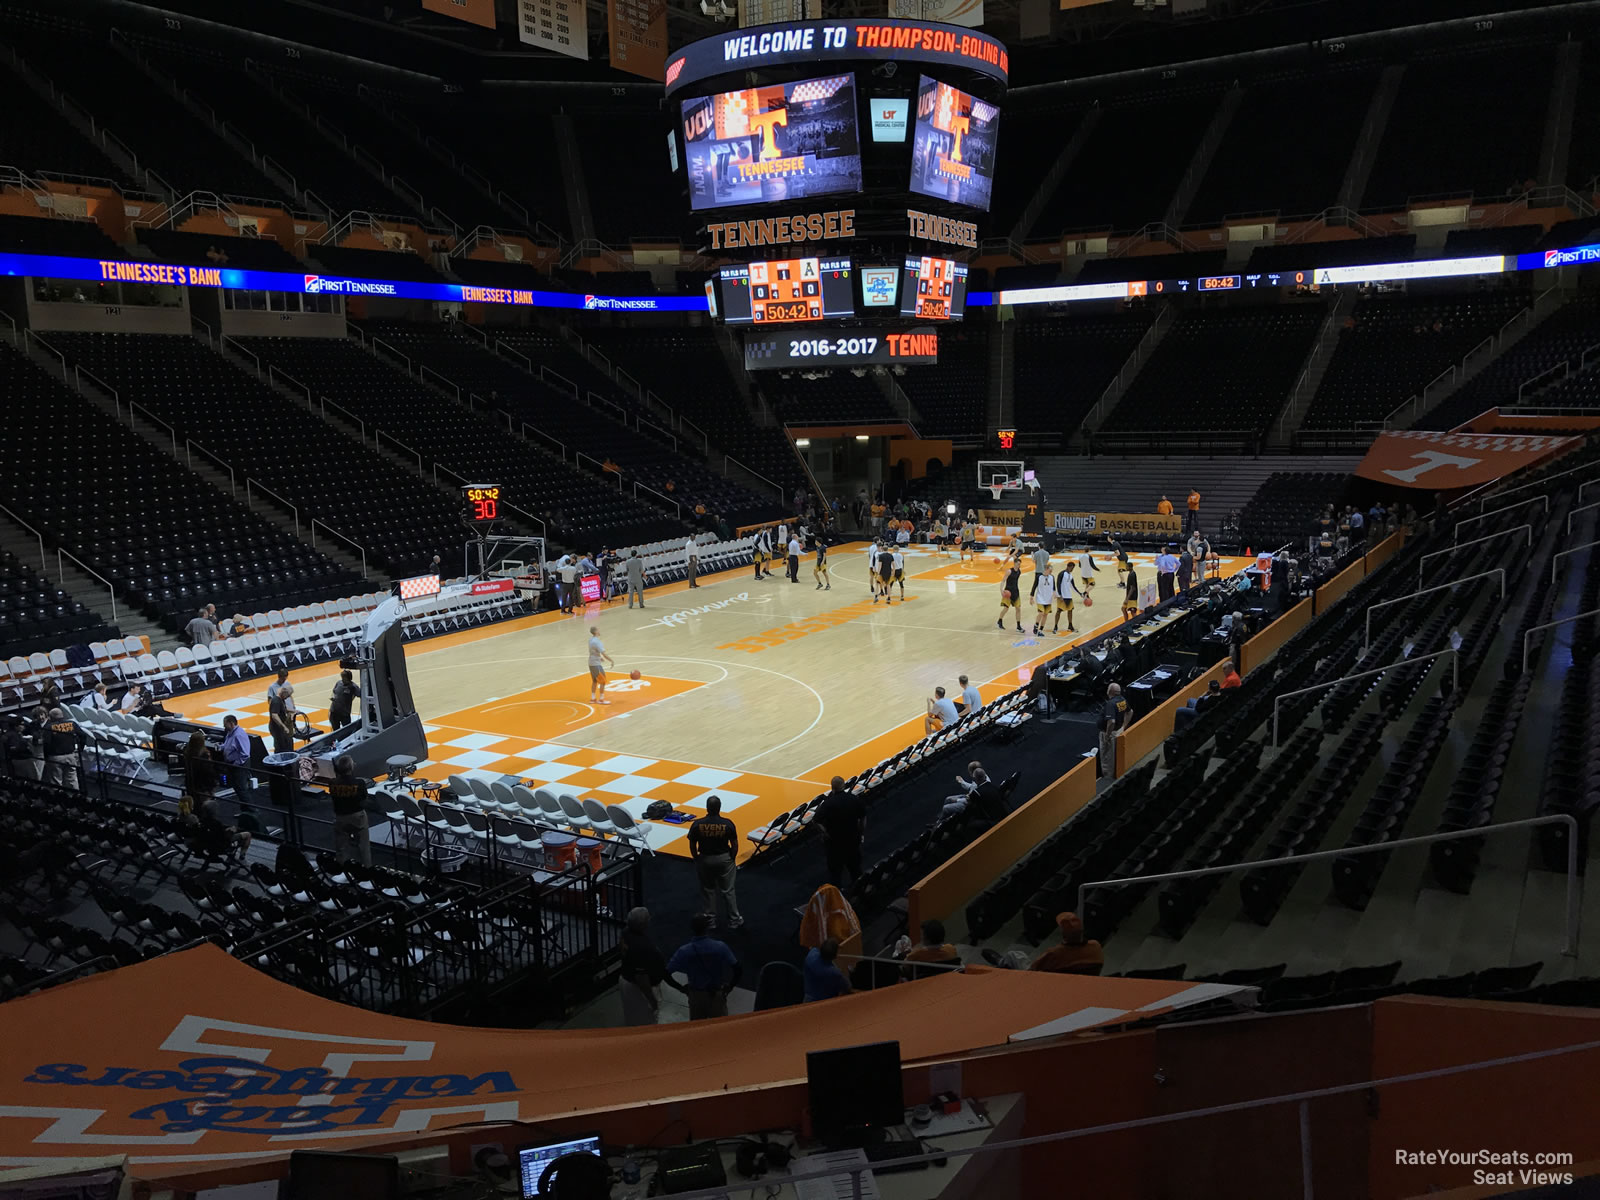 section 110, row 17 seat view  - thompson-boling arena